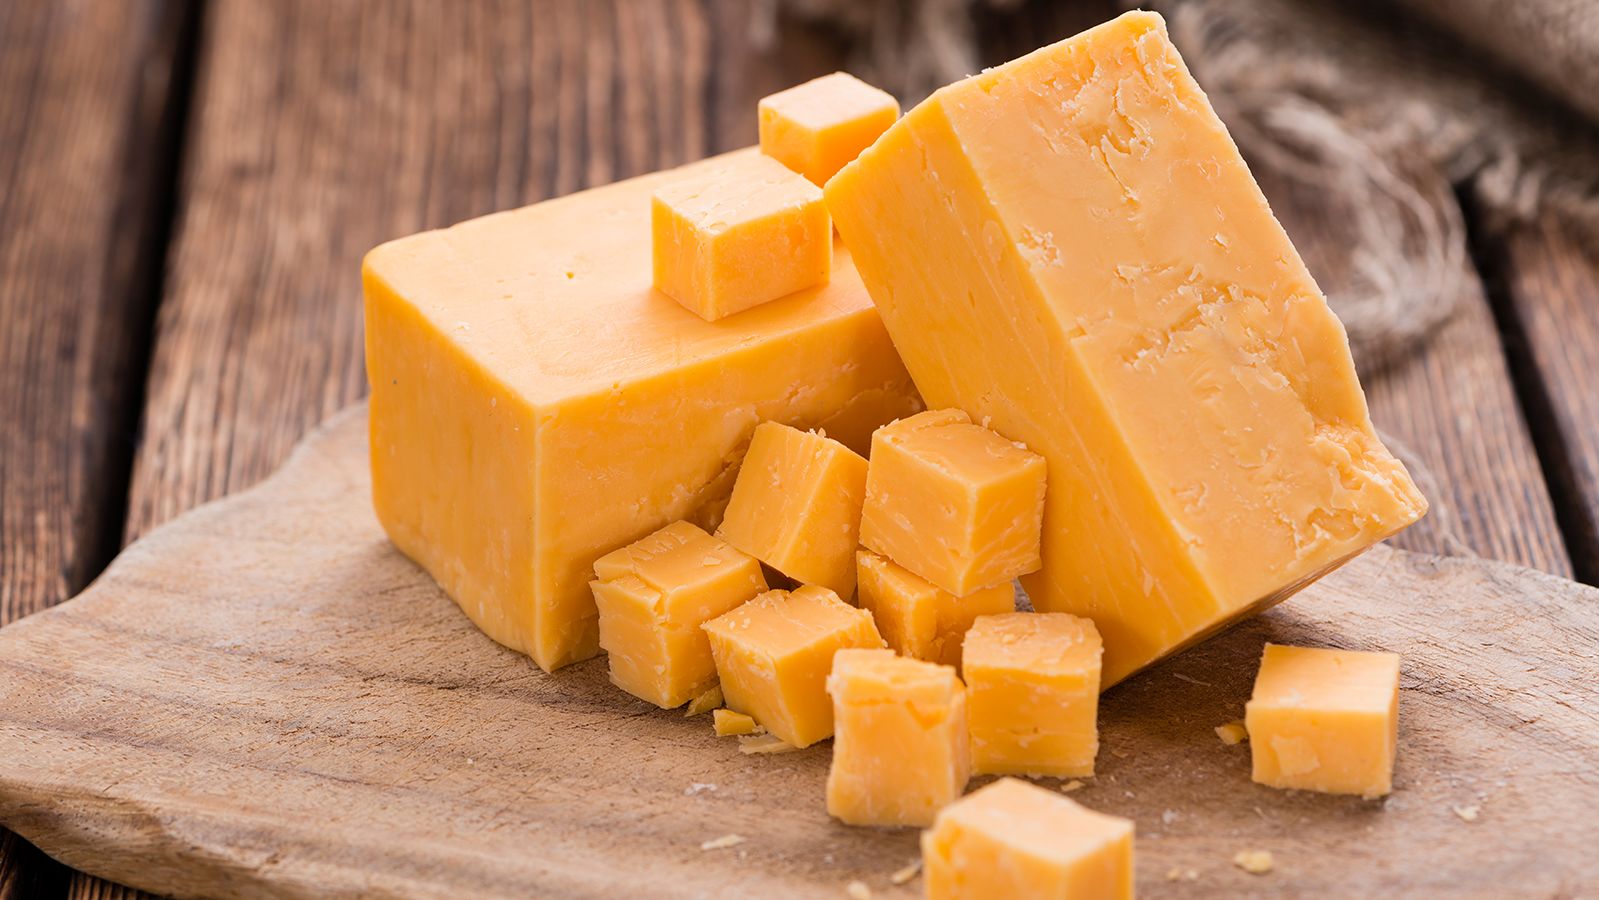 How cheddar cheese took over the world